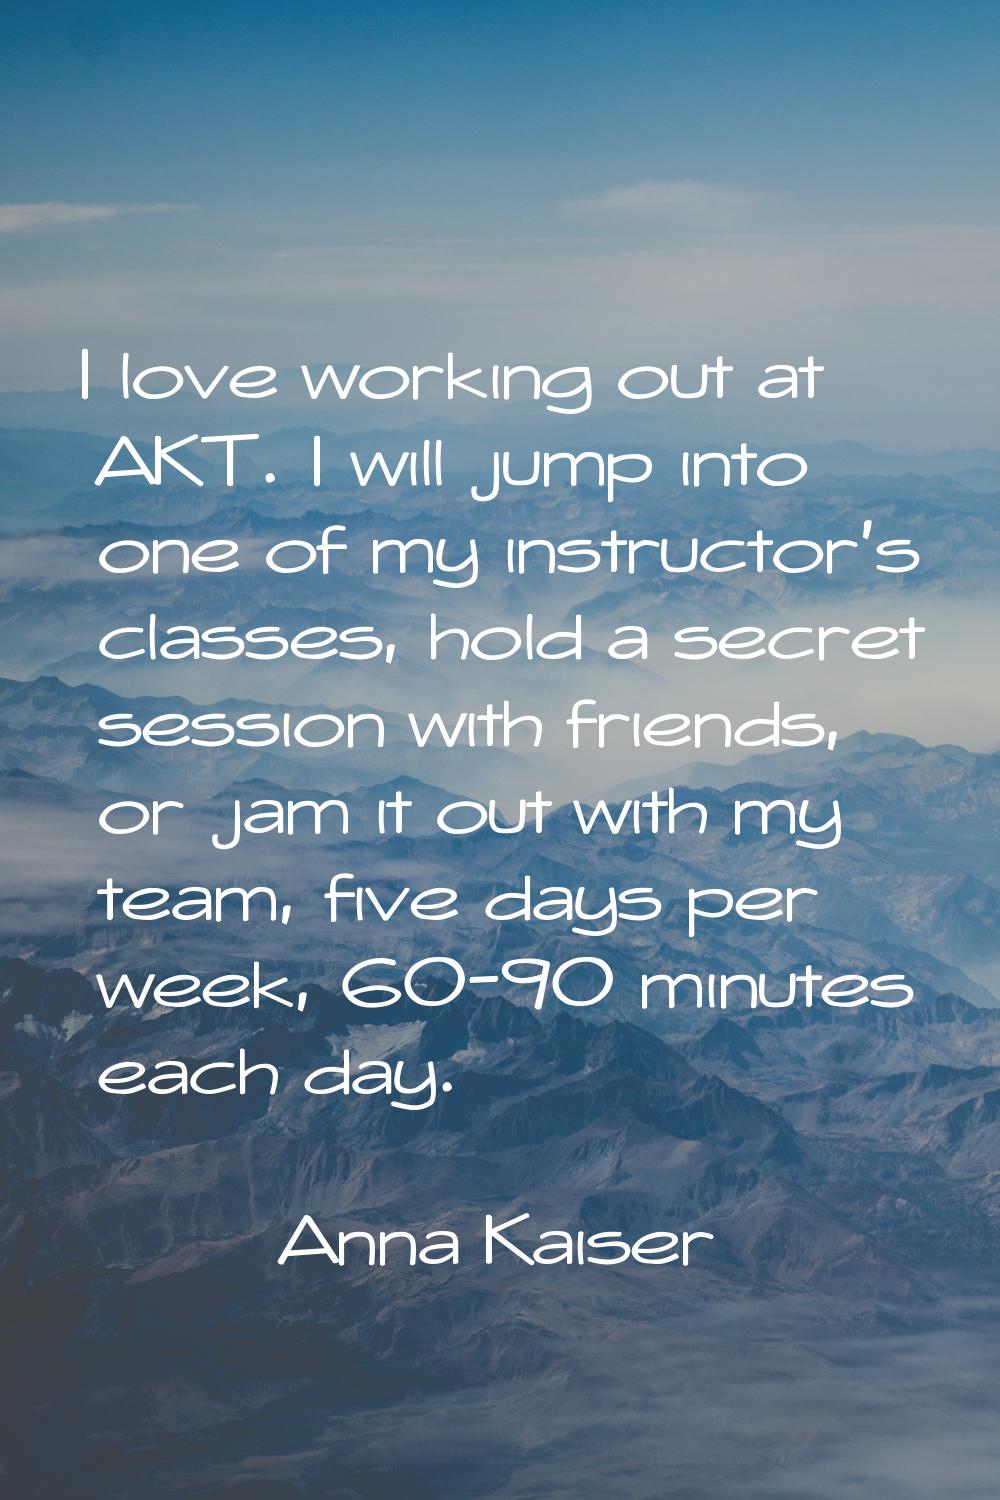 I love working out at AKT. I will jump into one of my instructor's classes, hold a secret session w